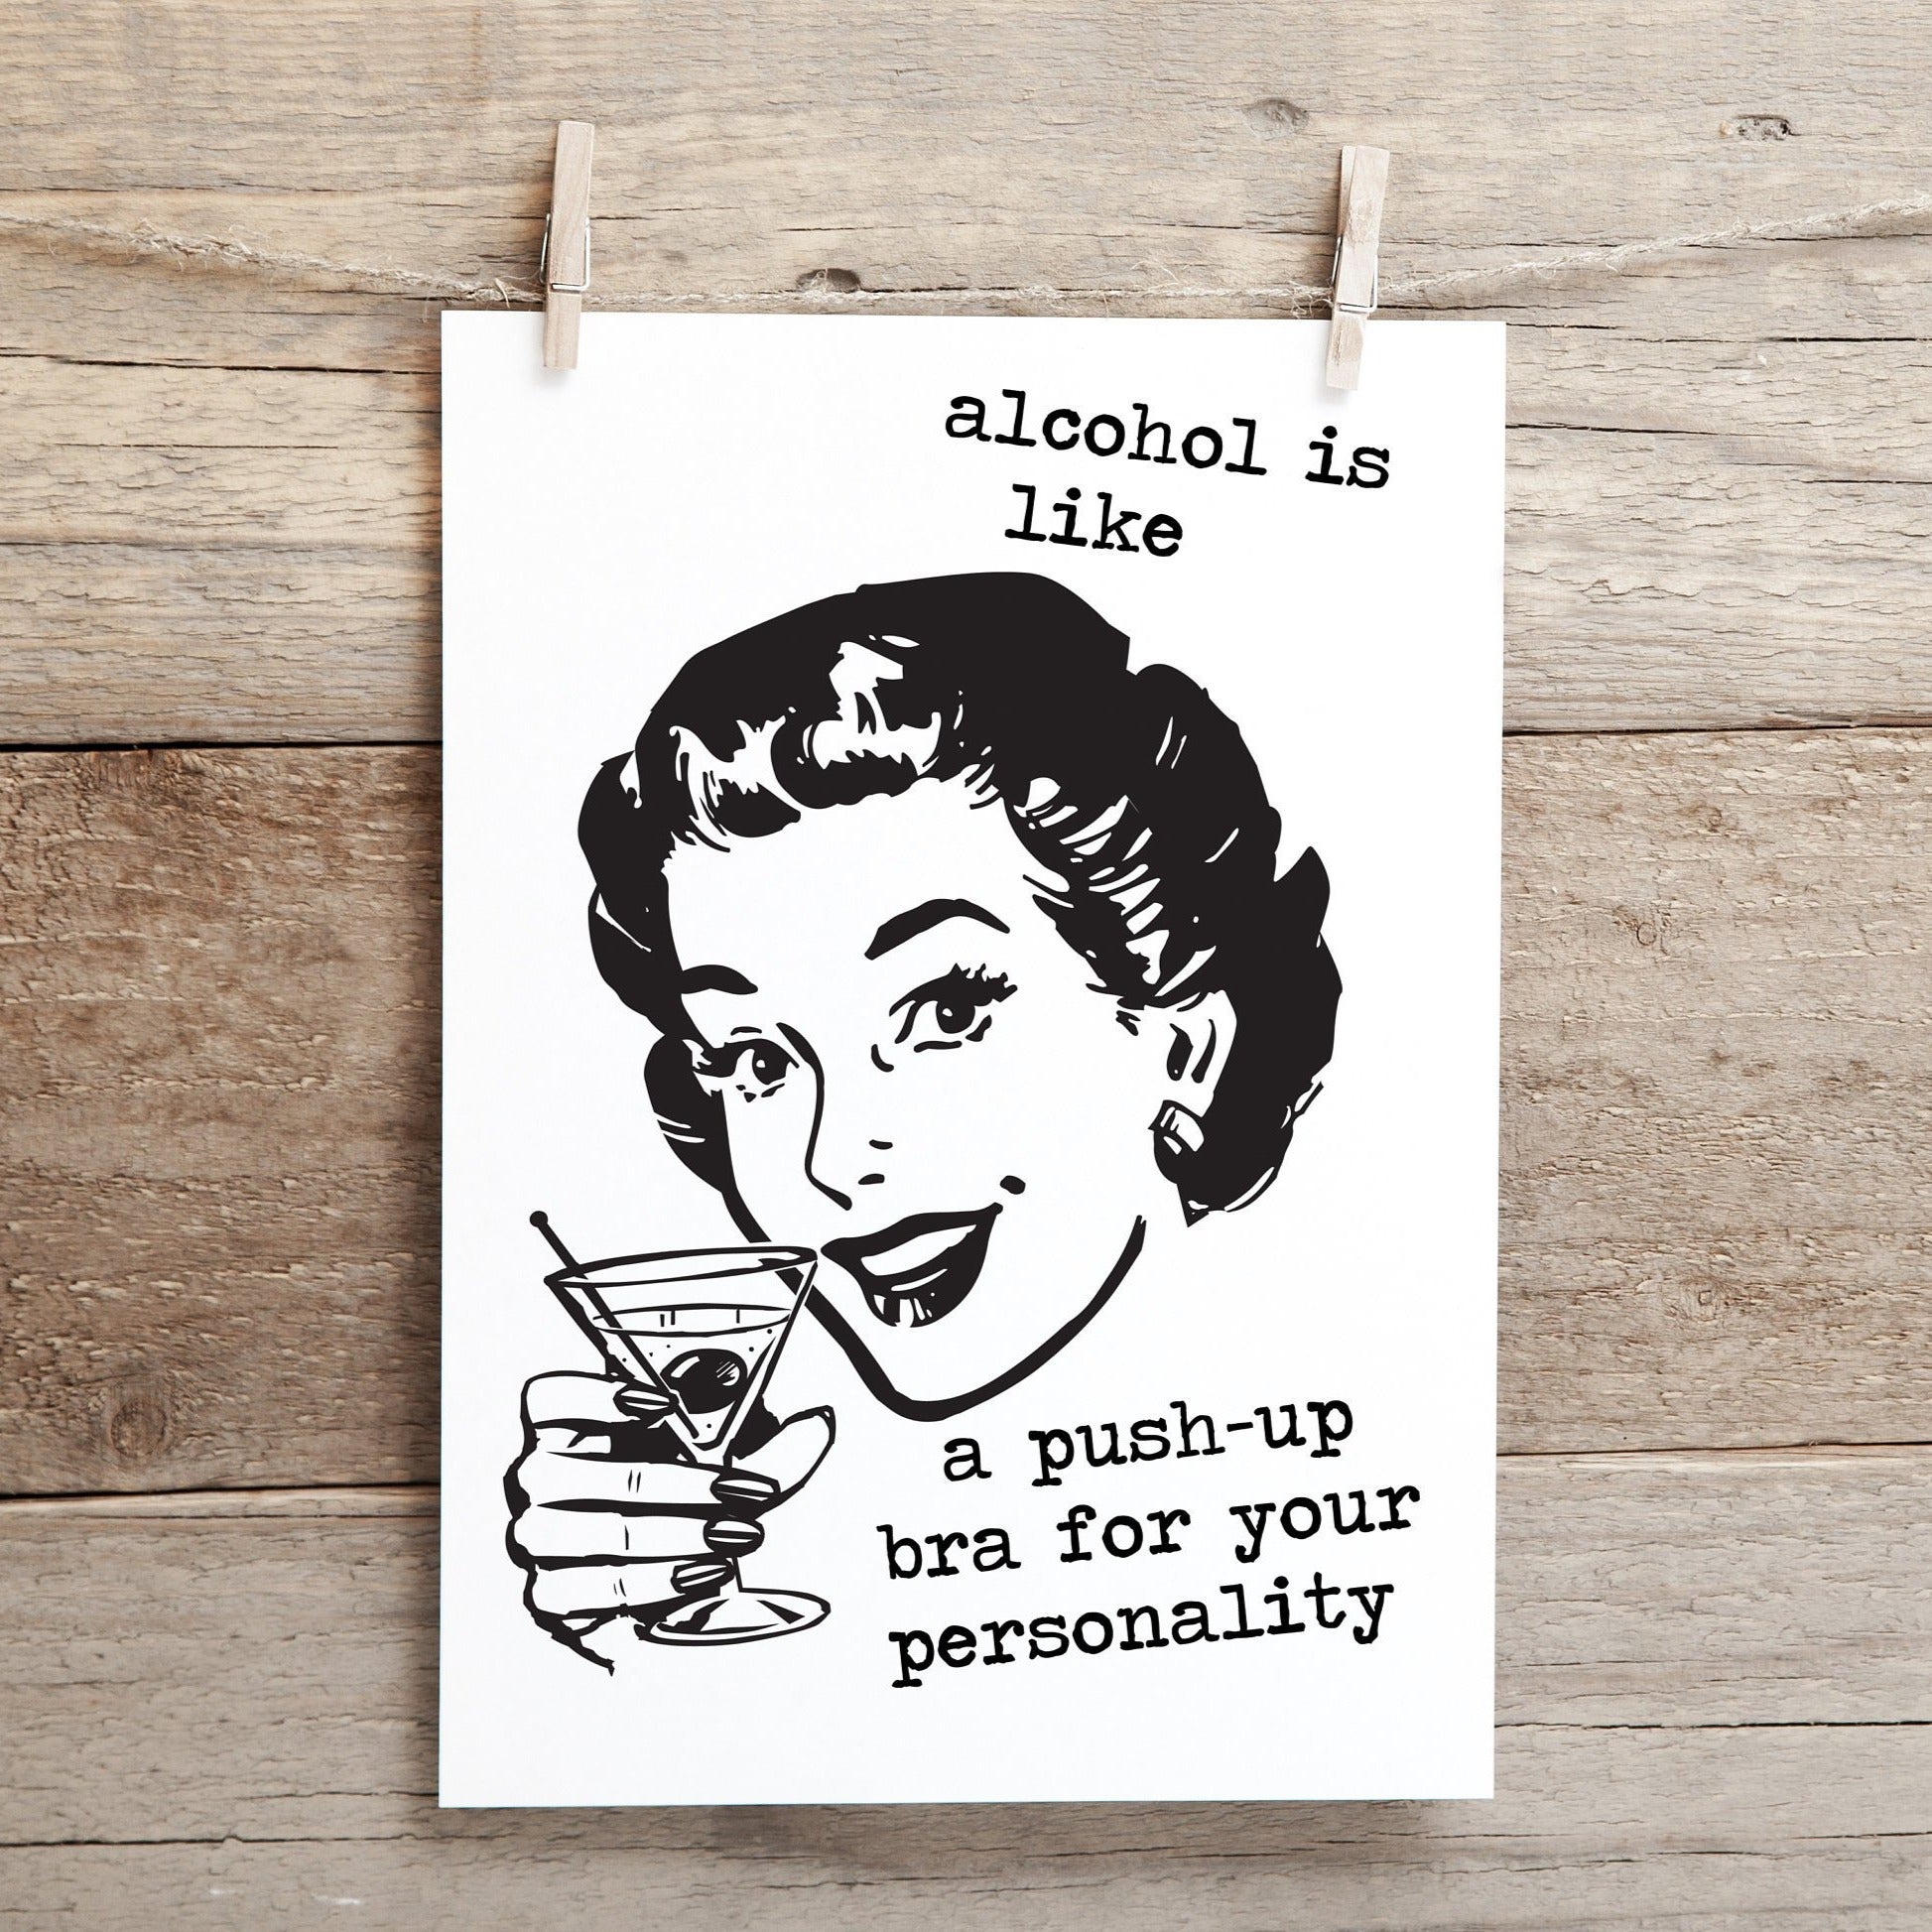 Alcohol is like a push up bra for your personality .. funny